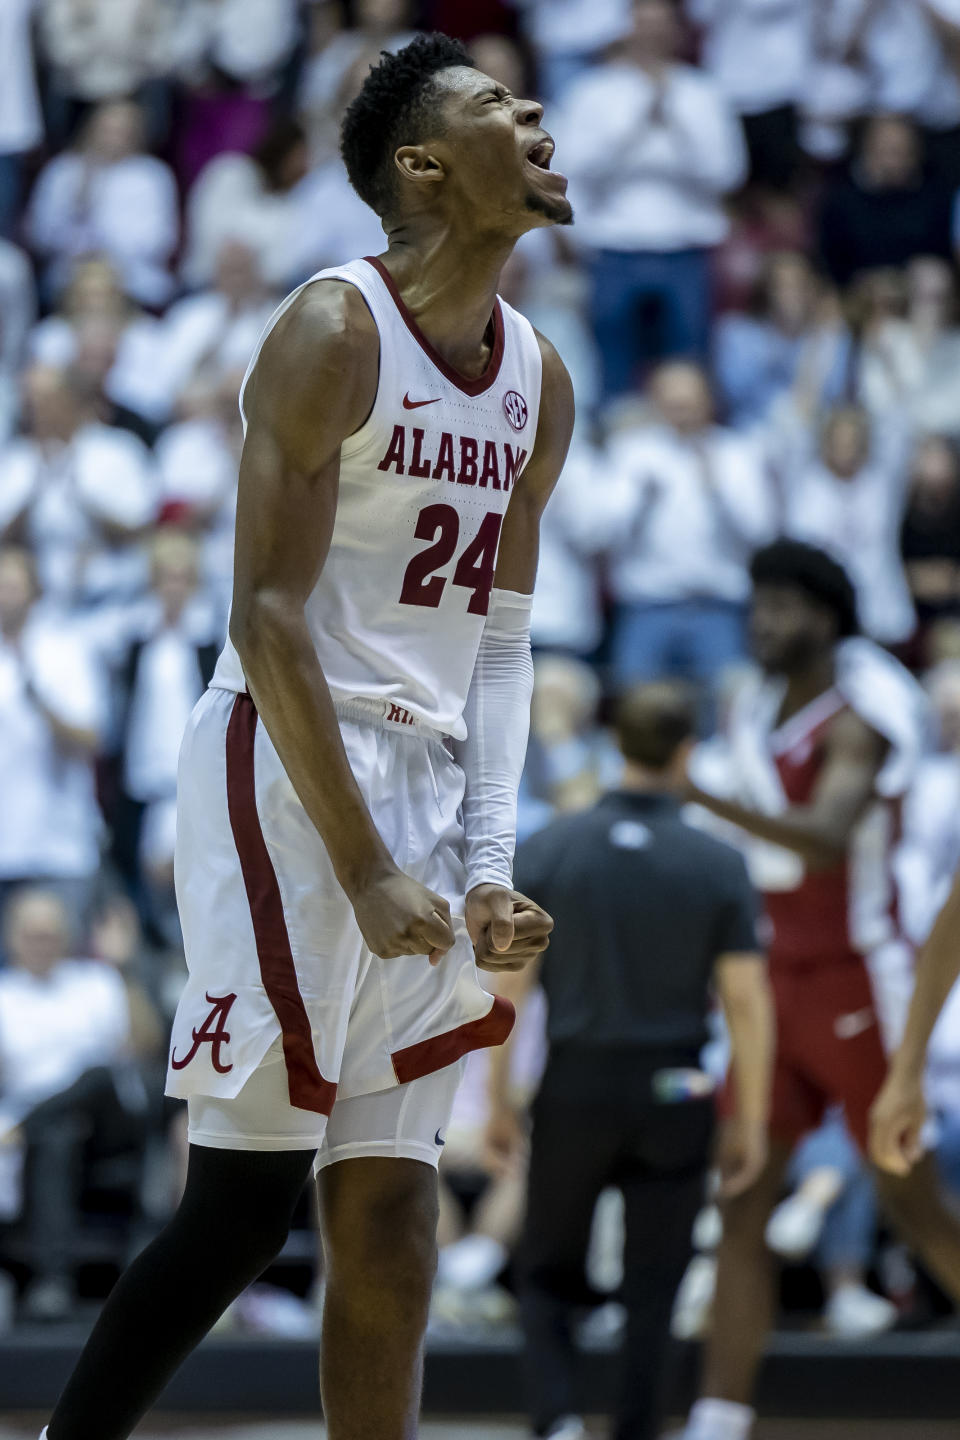 Alabama forward Brandon Miller (24) reacts after a score during the second half of an NCAA college basketball game against Arkansas, Saturday, Feb. 25, 2023, in Tuscaloosa, Ala. (AP Photo/Vasha Hunt)